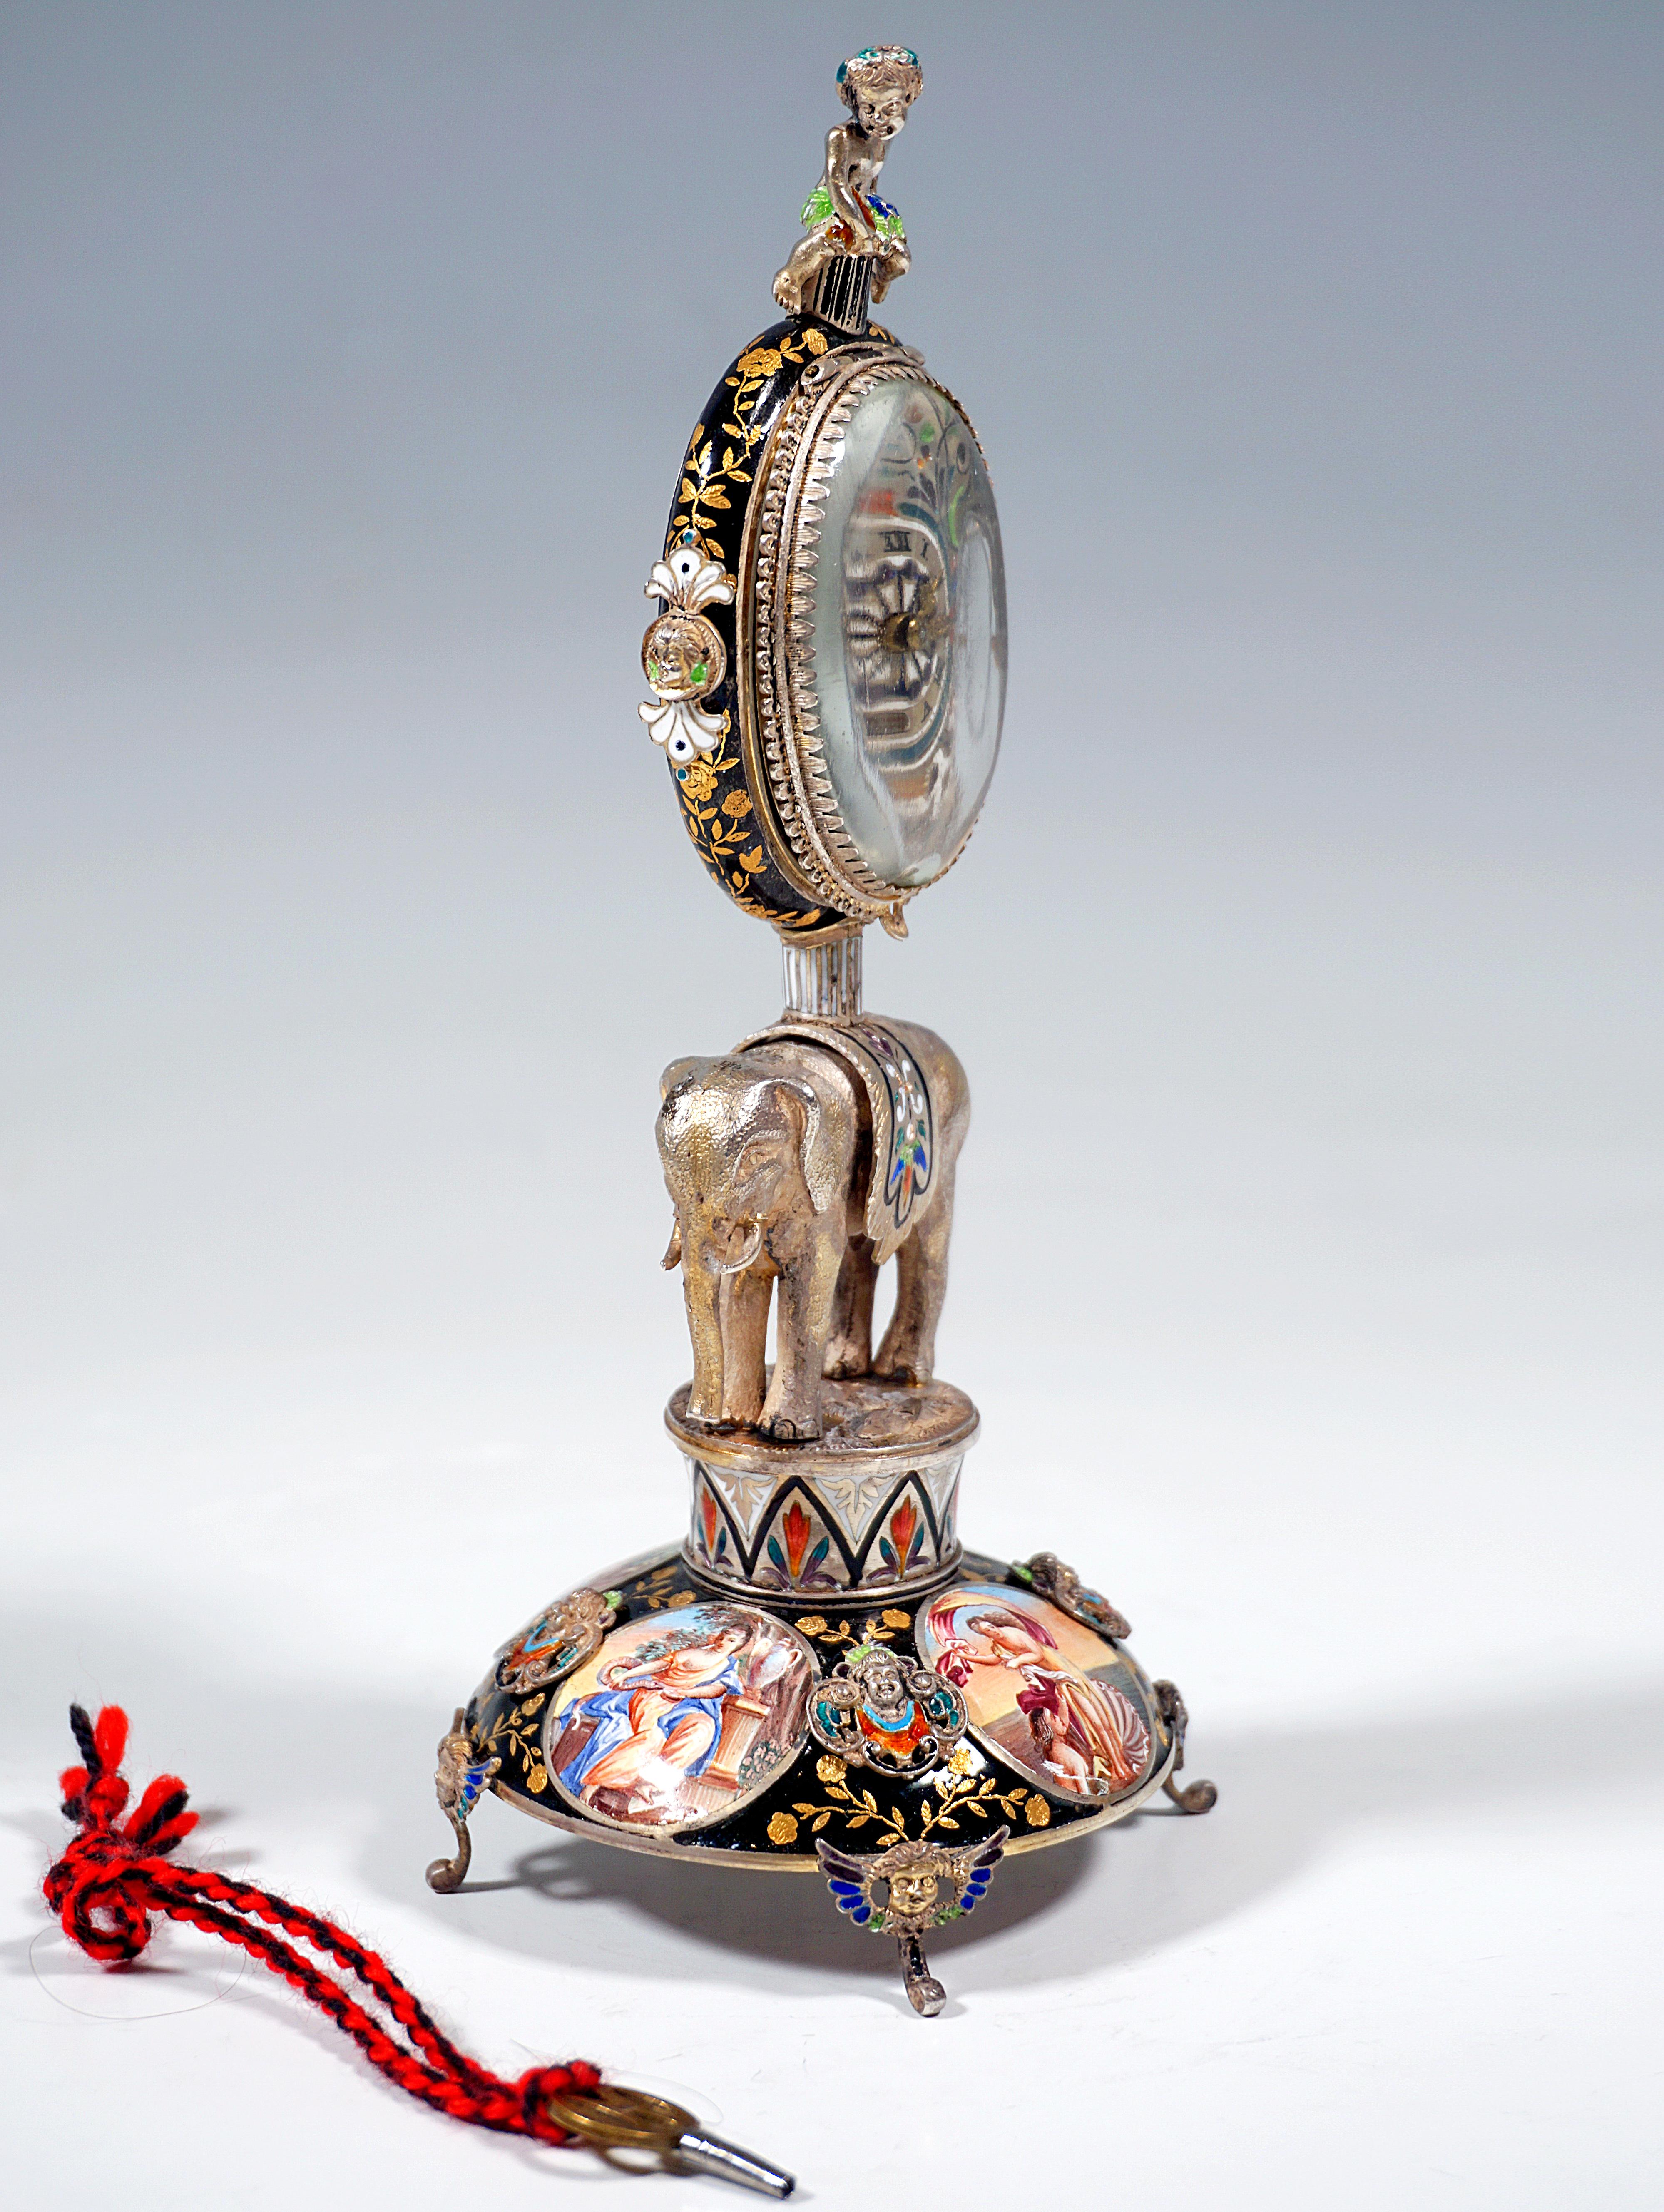 Austrian Viennese Silver Enamel Table Clock with Elephant Carrying the Case, ca. 1880